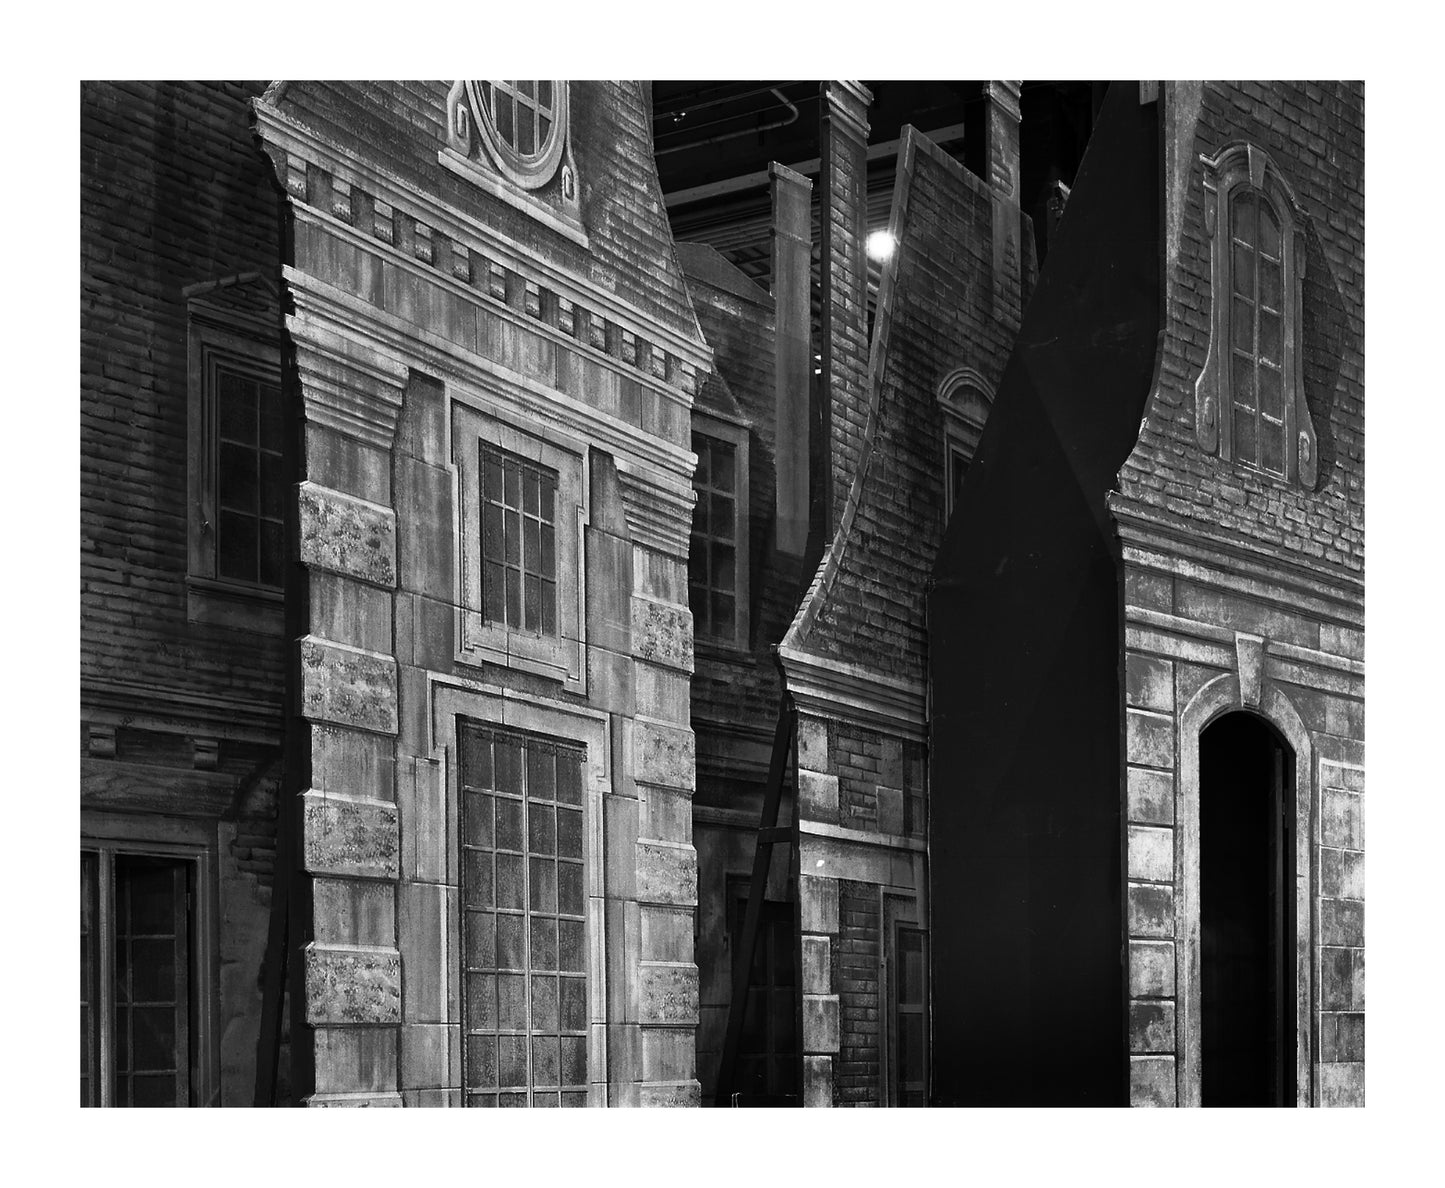 	“Manon Building Façade” by Abelardo Morell, monochromatic architectural composition showcasing an intricate play of light and shadow on a series of ornate façades. The realistic detailing and perspective create a surreal, almost impressionist ambiance.